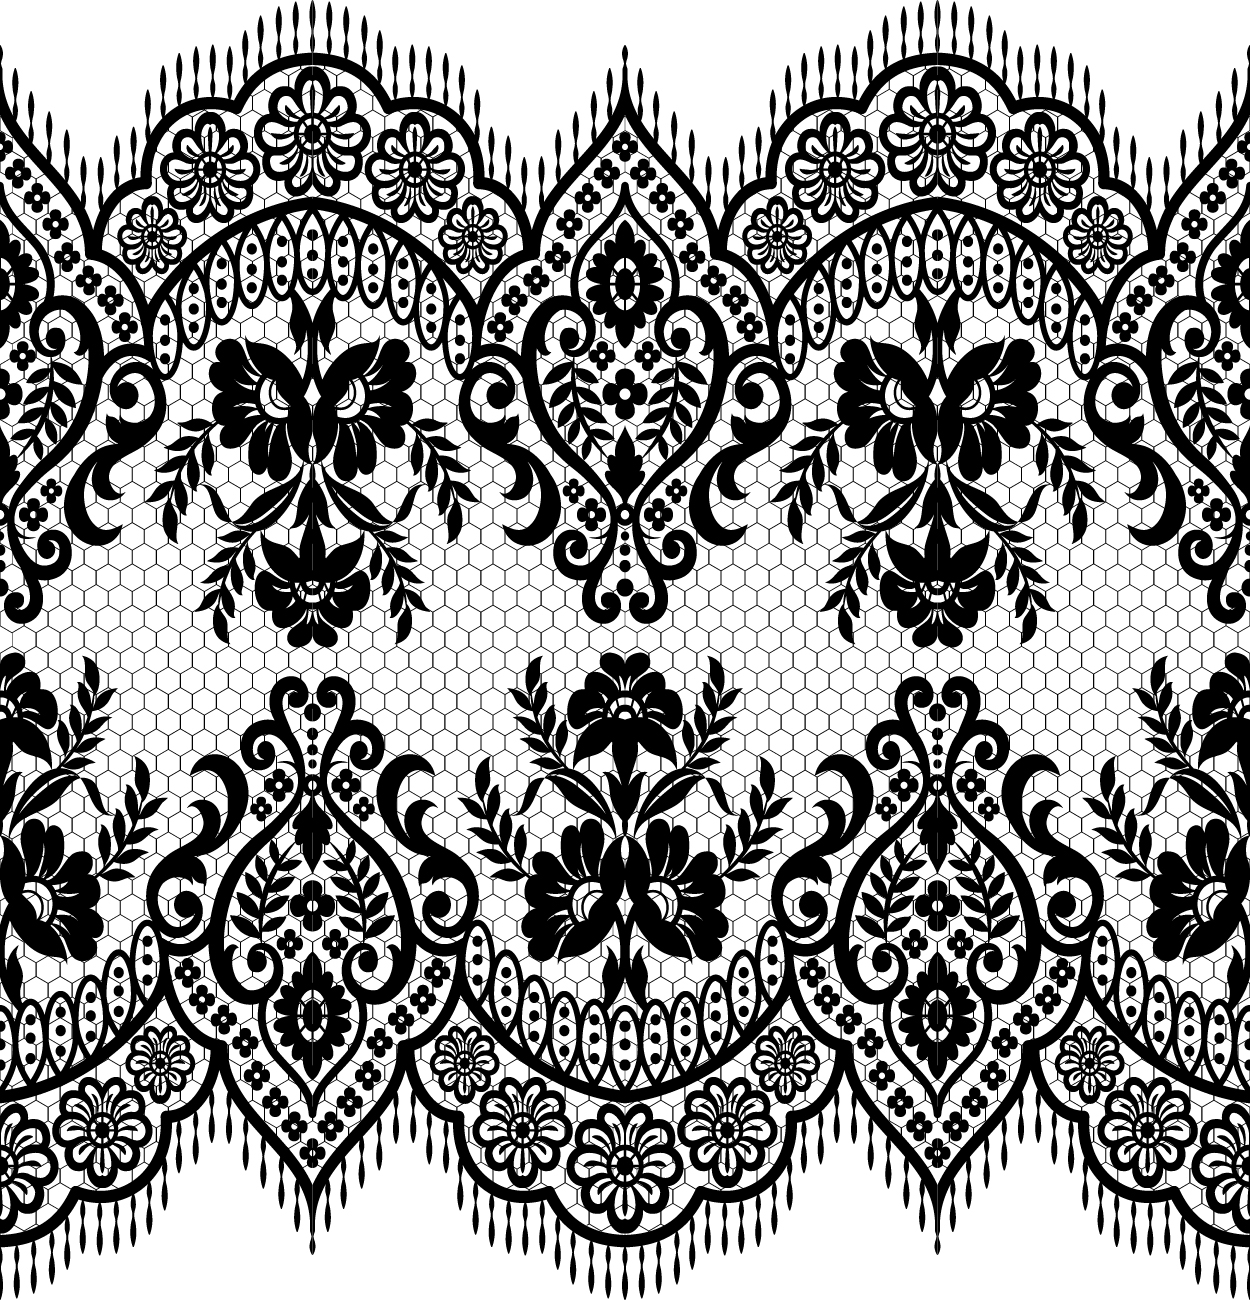 lace-seamless-borders-vectors-set-02-free-download